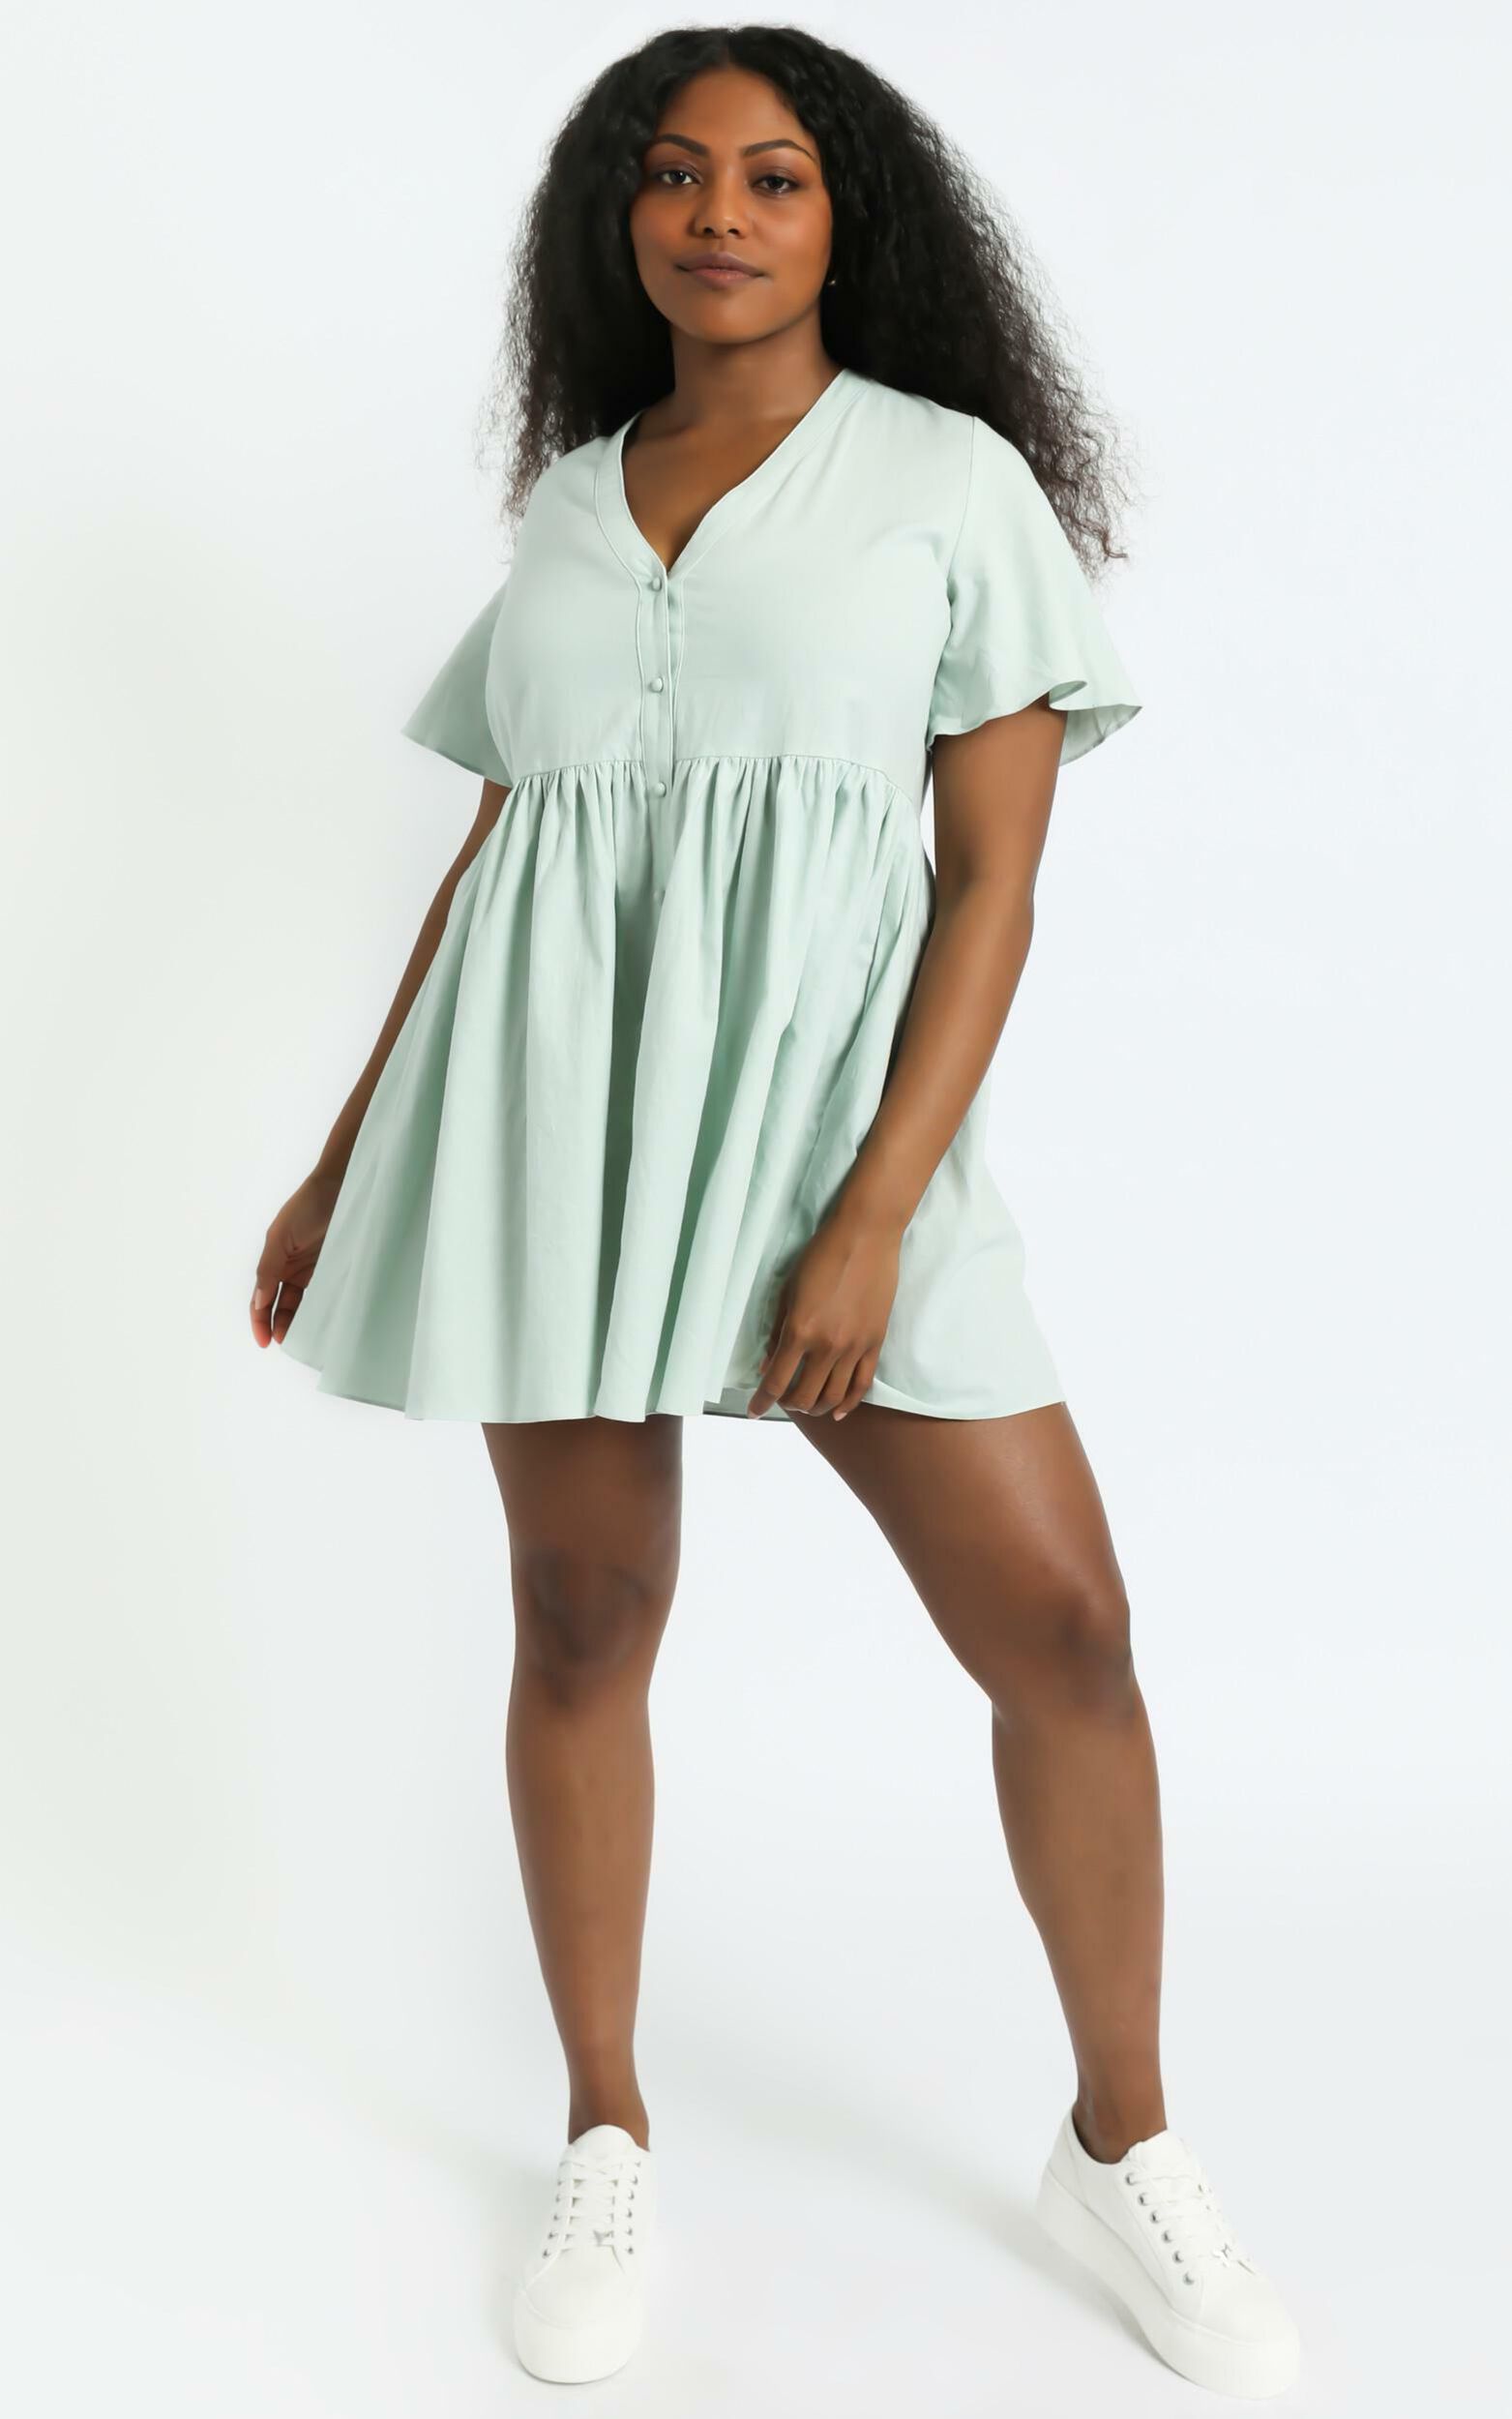 Staycation Smock Button Up Mini Dress in Light Sage - 04, GRN4